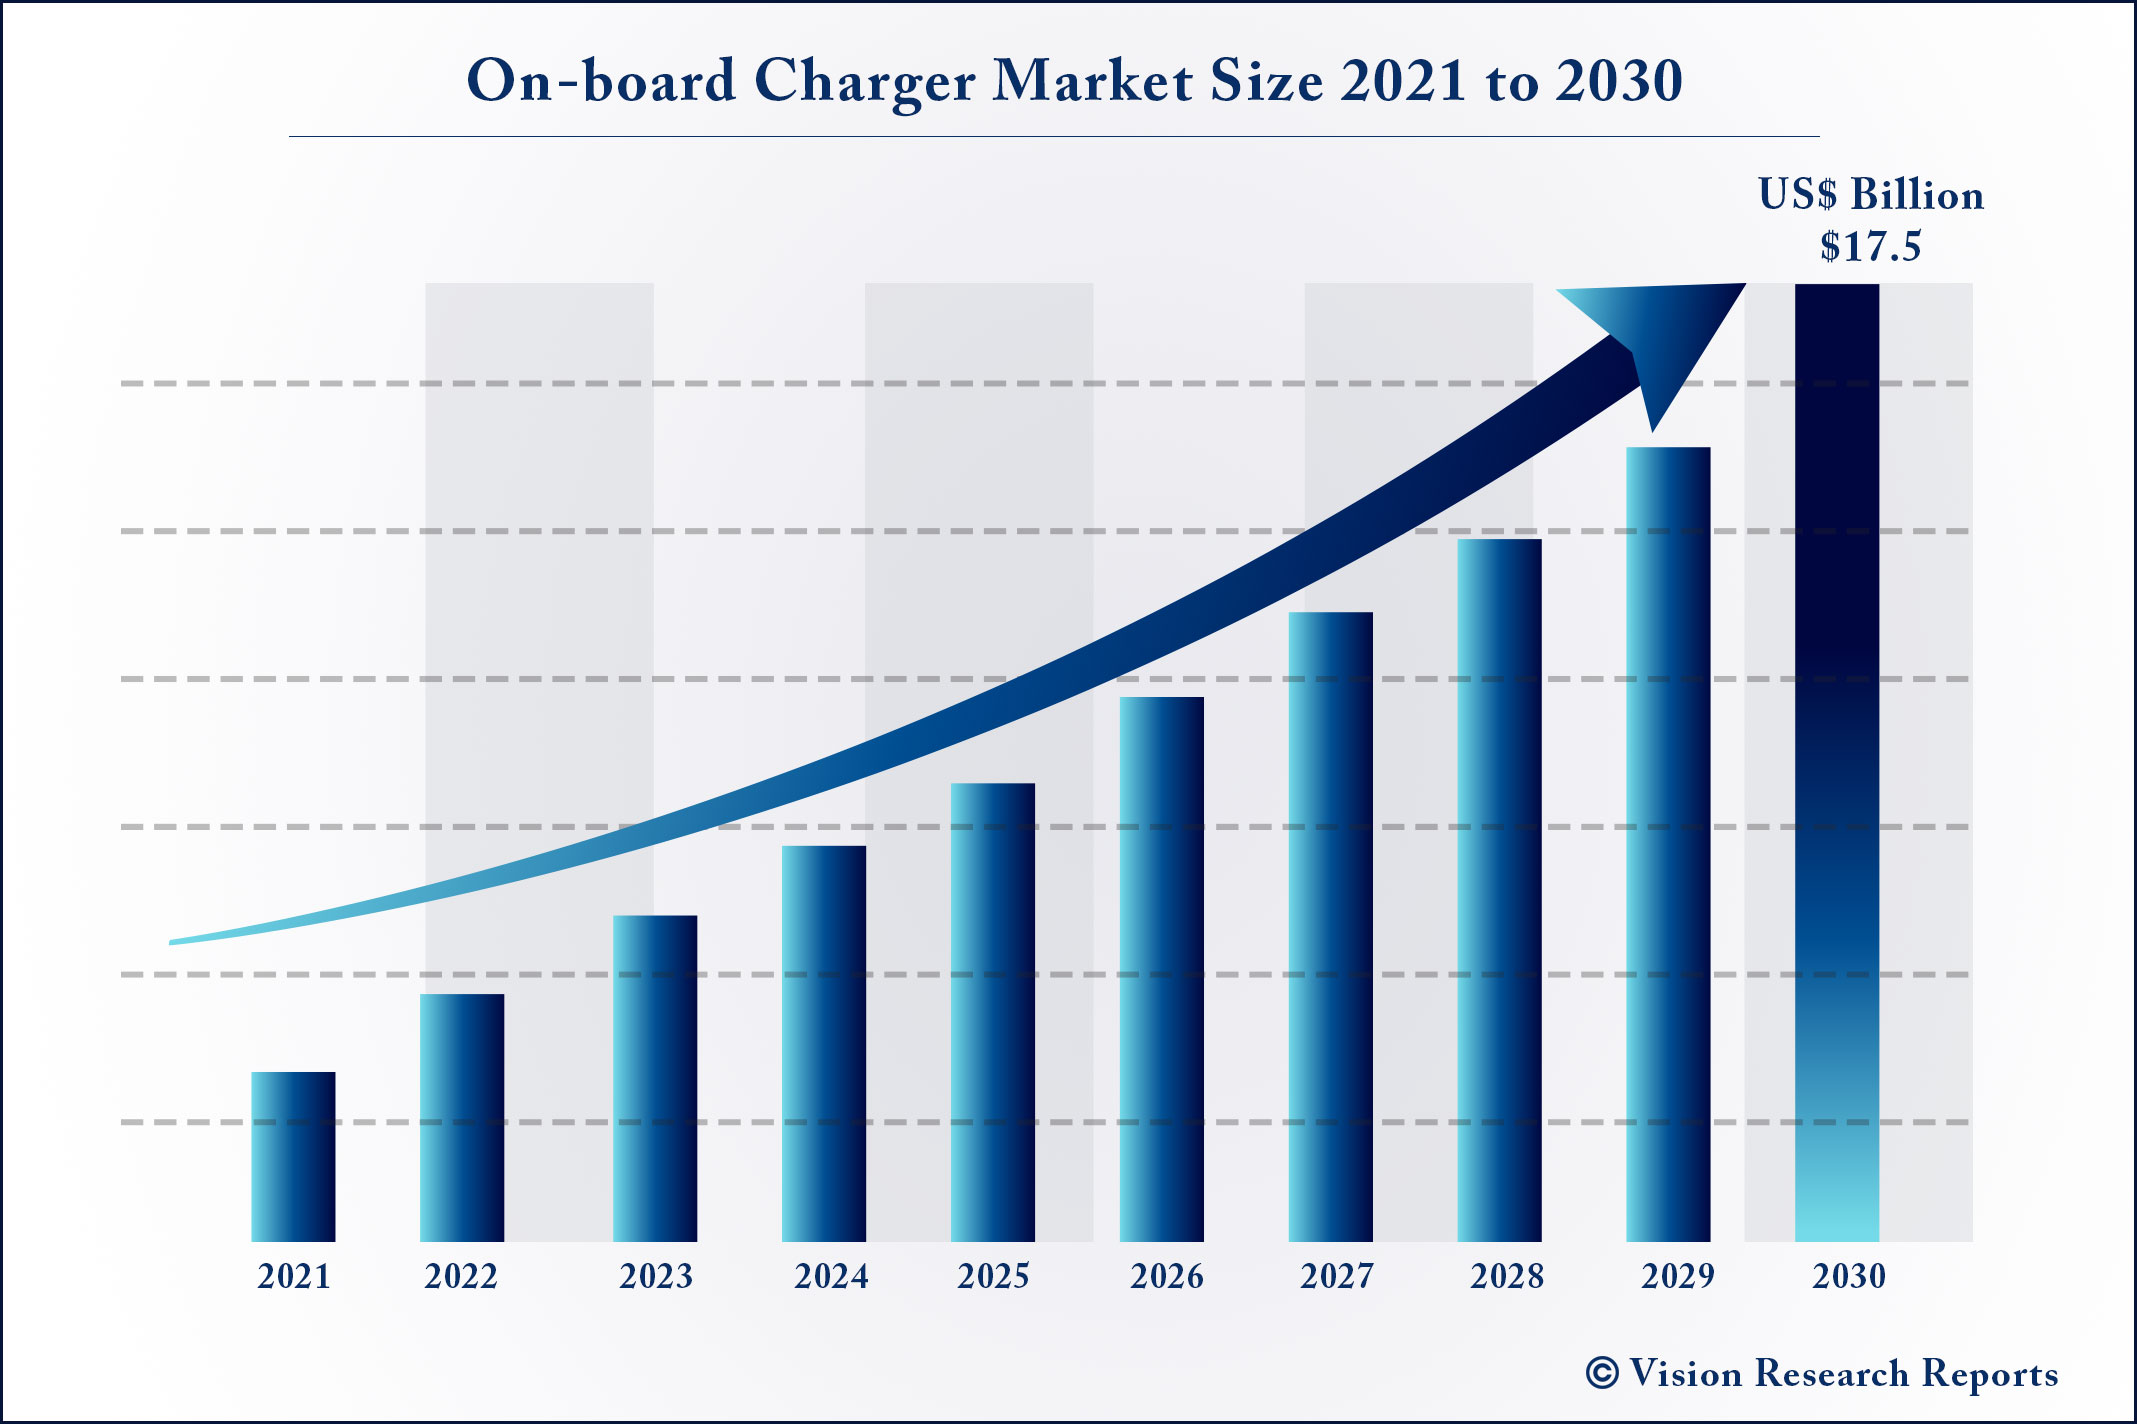 On-board Charger Market Size 2021 to 2030